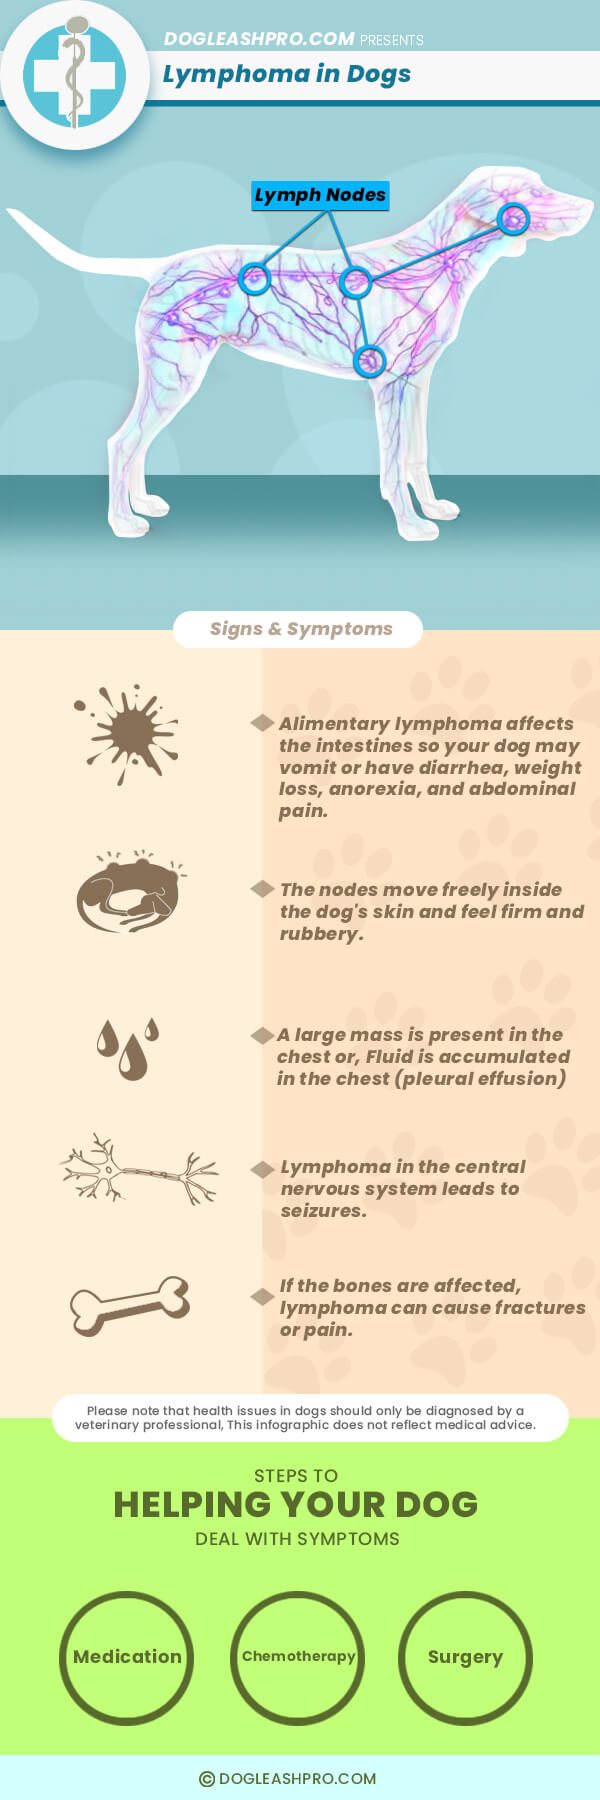 Lymphoma in Dogs infographic